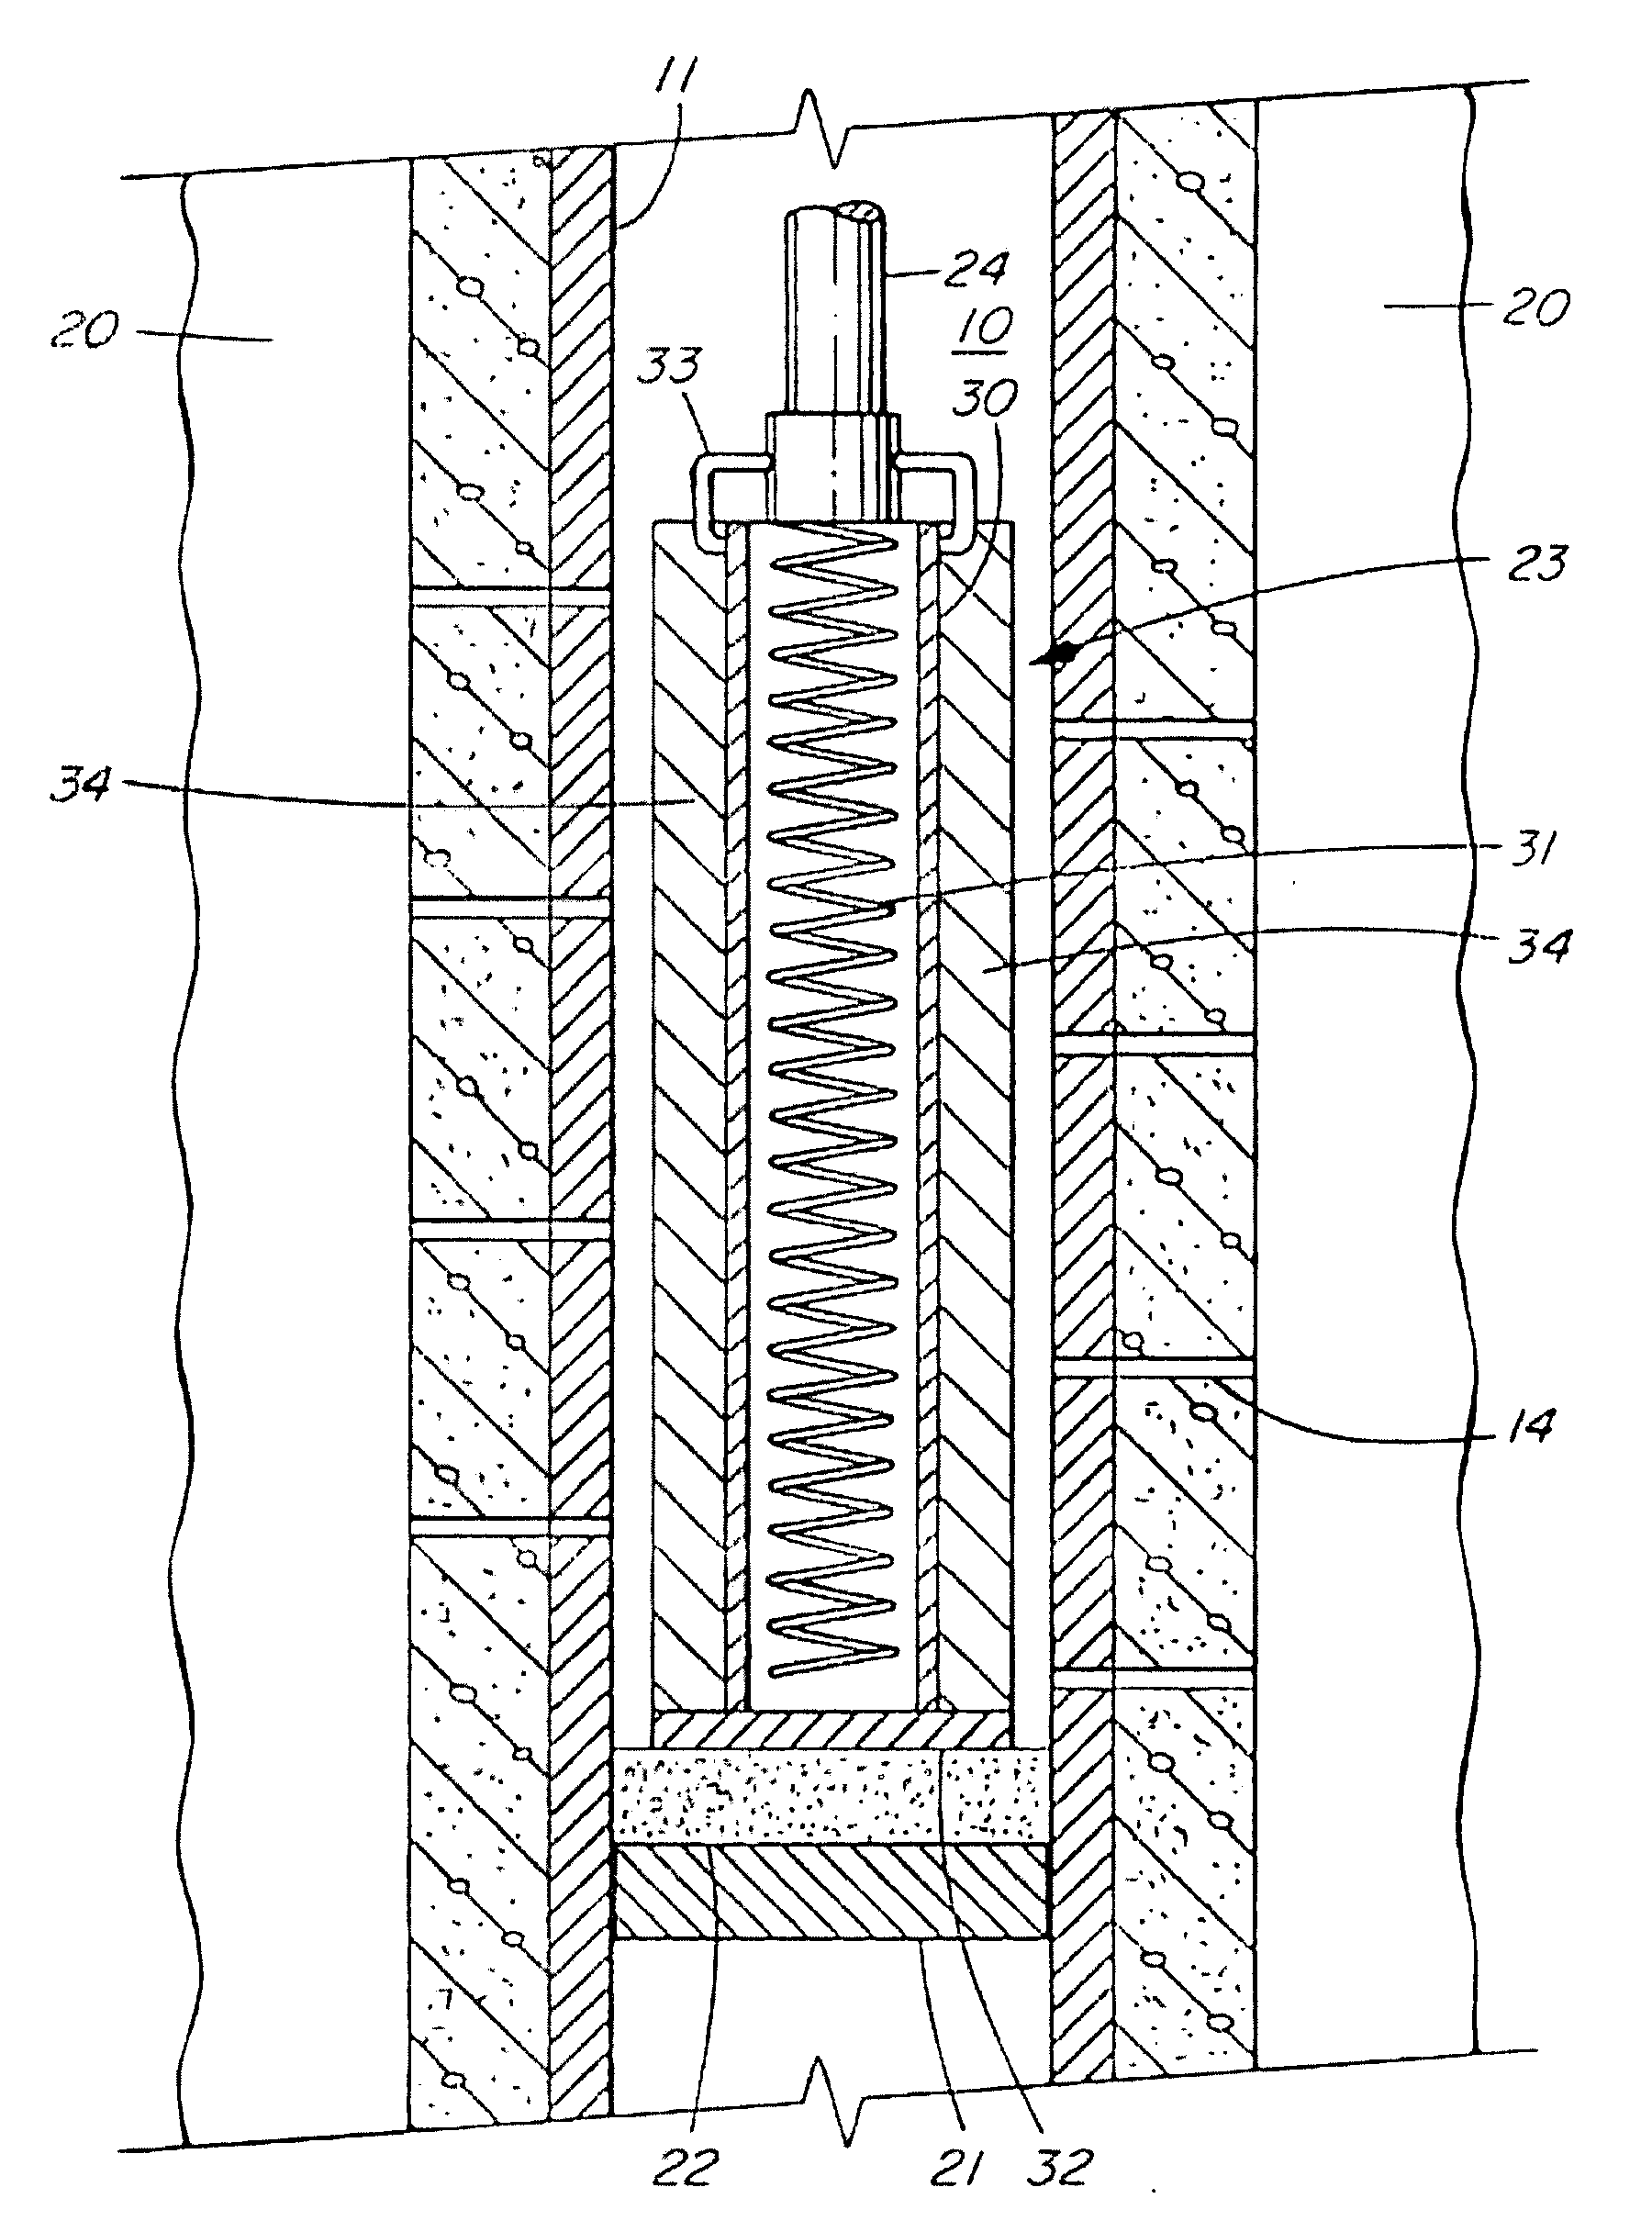 Method and apparatus for plugging perforations